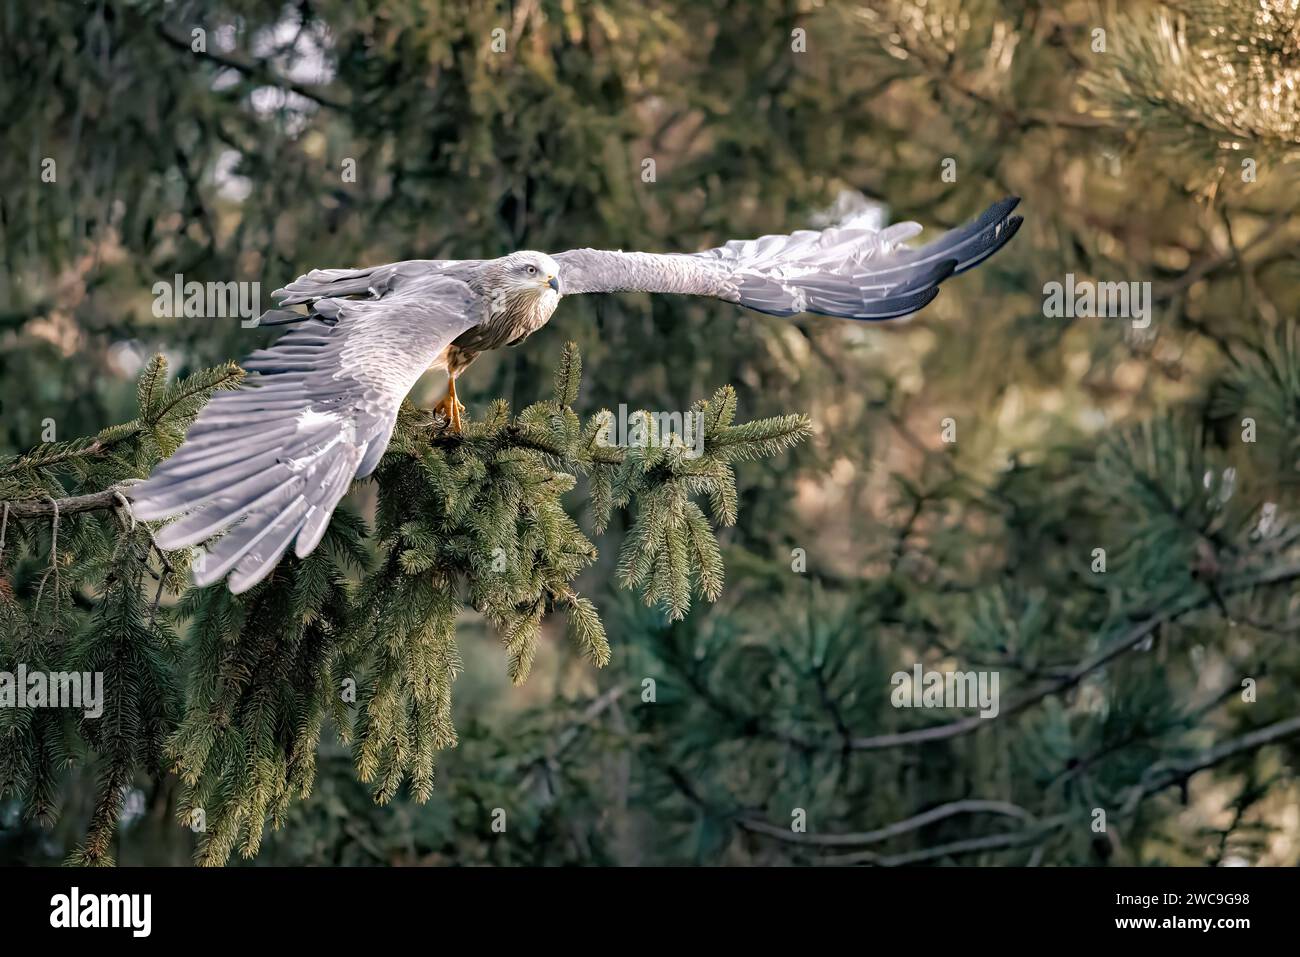 A hawk taking off from a branch in the forest. Stock Photo